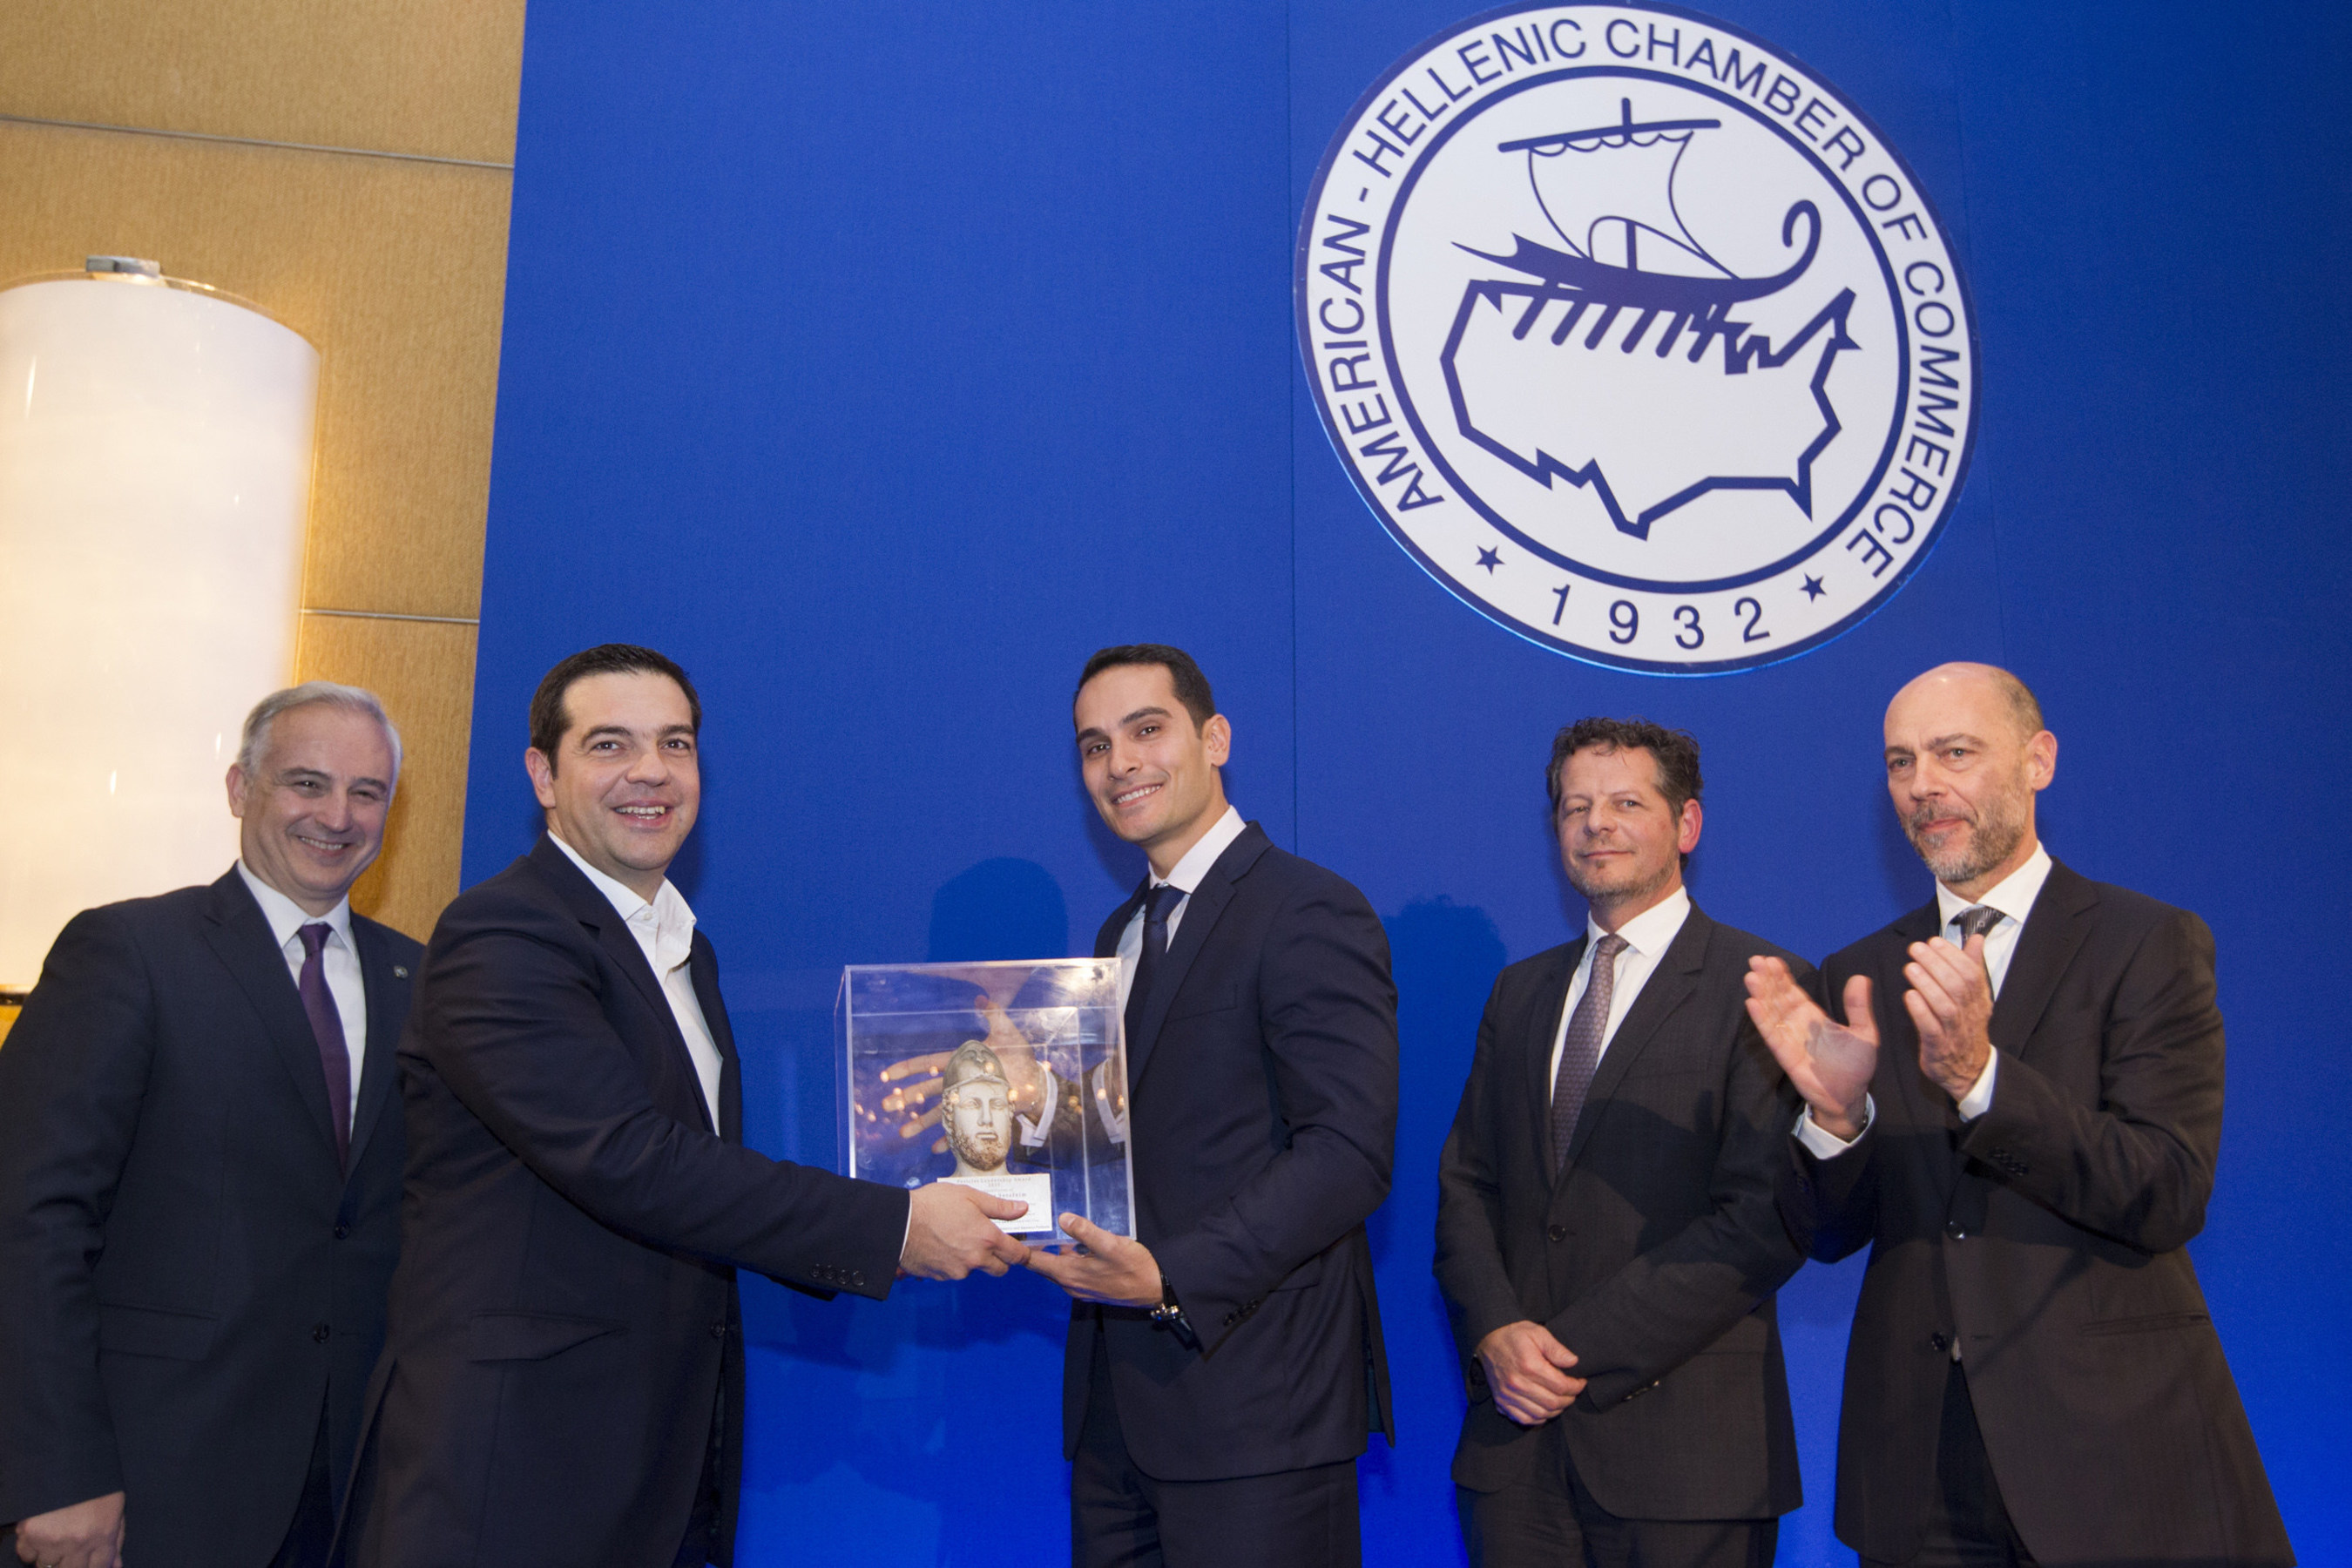 From left to right:  Elias Spirtounias, American-Hellenic Chamber of Commerce Executive Director; Alexis Tsipras, Prime Minister of the Hellenic Republic; George Serafeim, Harvard Business School Professor; John Moran, former Secretary General of the Ireland Department of Finance and European Investment Bank Director; and Simos Anastasopoulos, American-Hellenic Chamber of Commerce President.